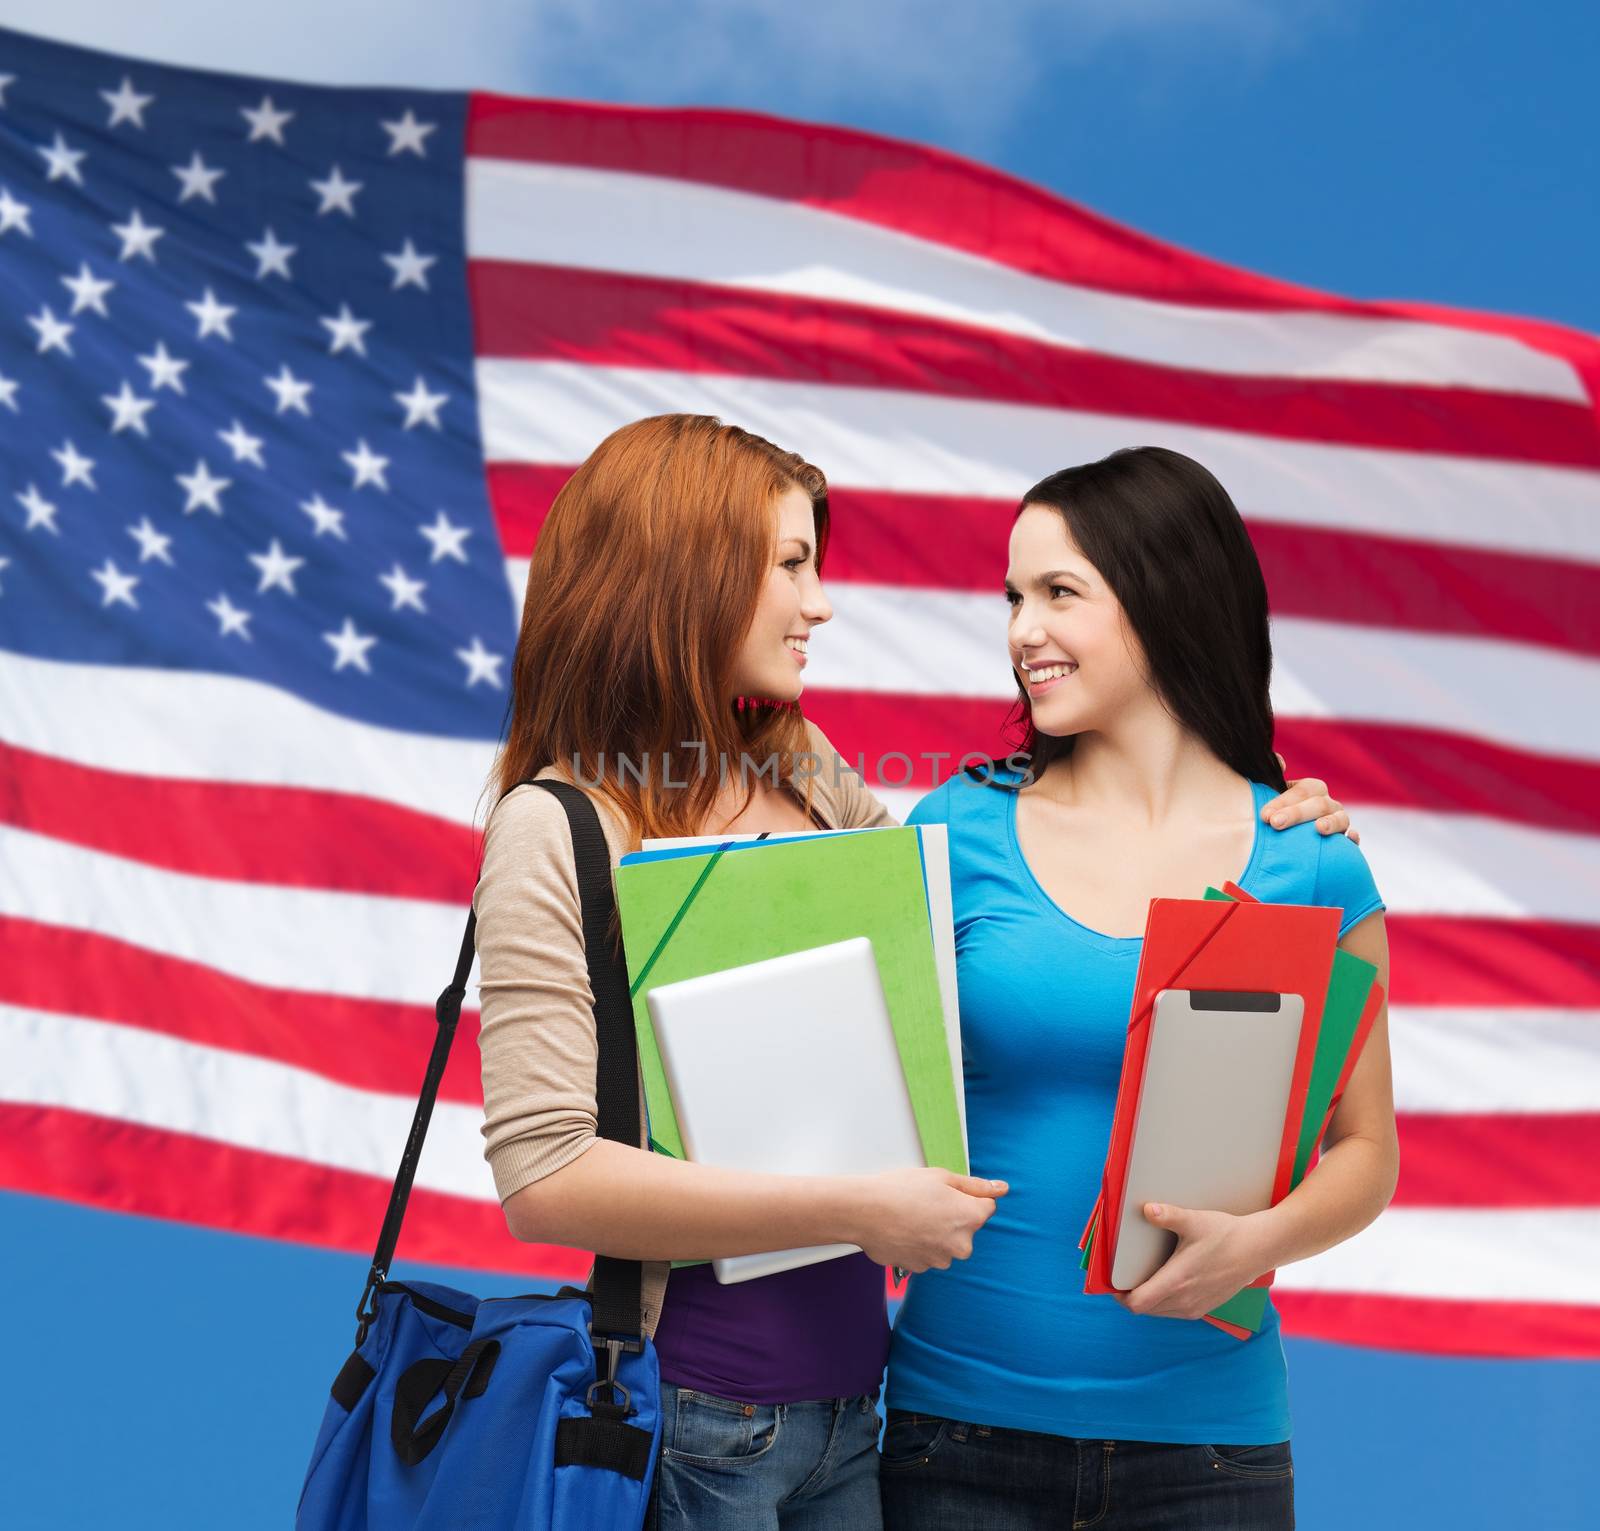 education and people concept - two smiling students with bag and folders looking at each other over american flag background